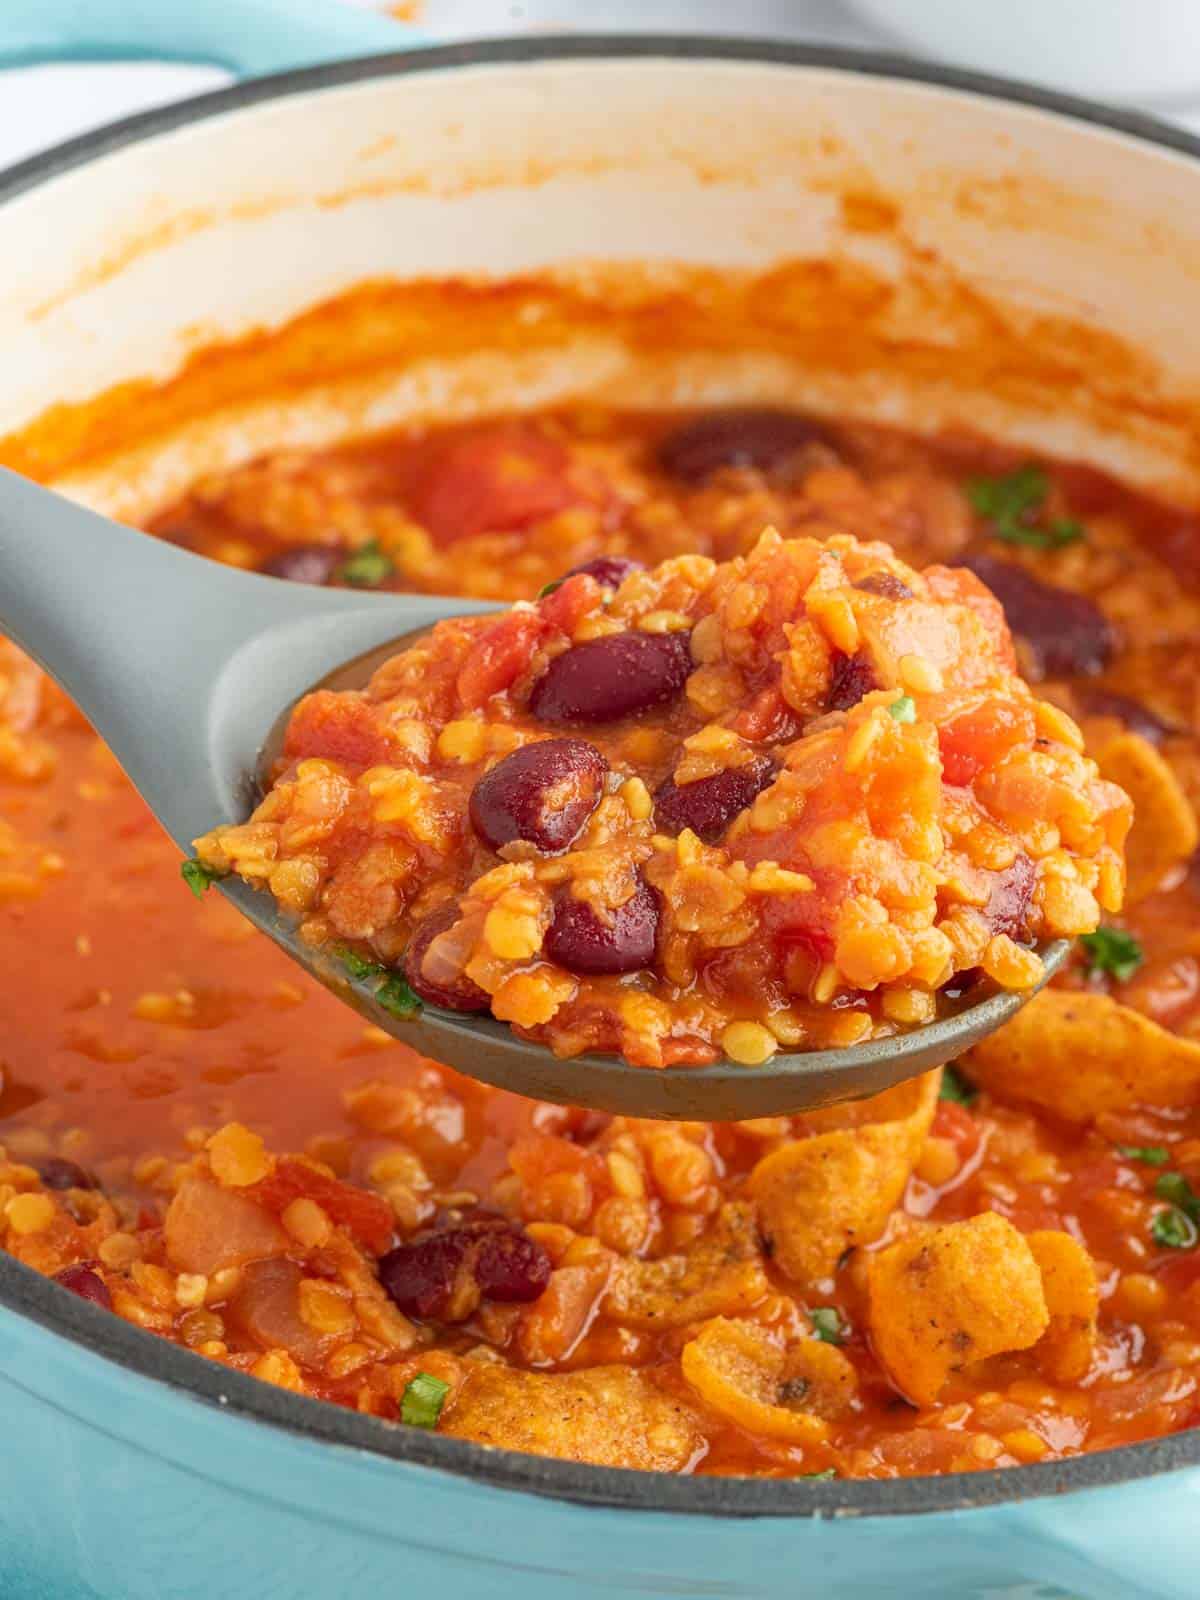 A spoon scoops a serving of meatless chili from a dutch oven.